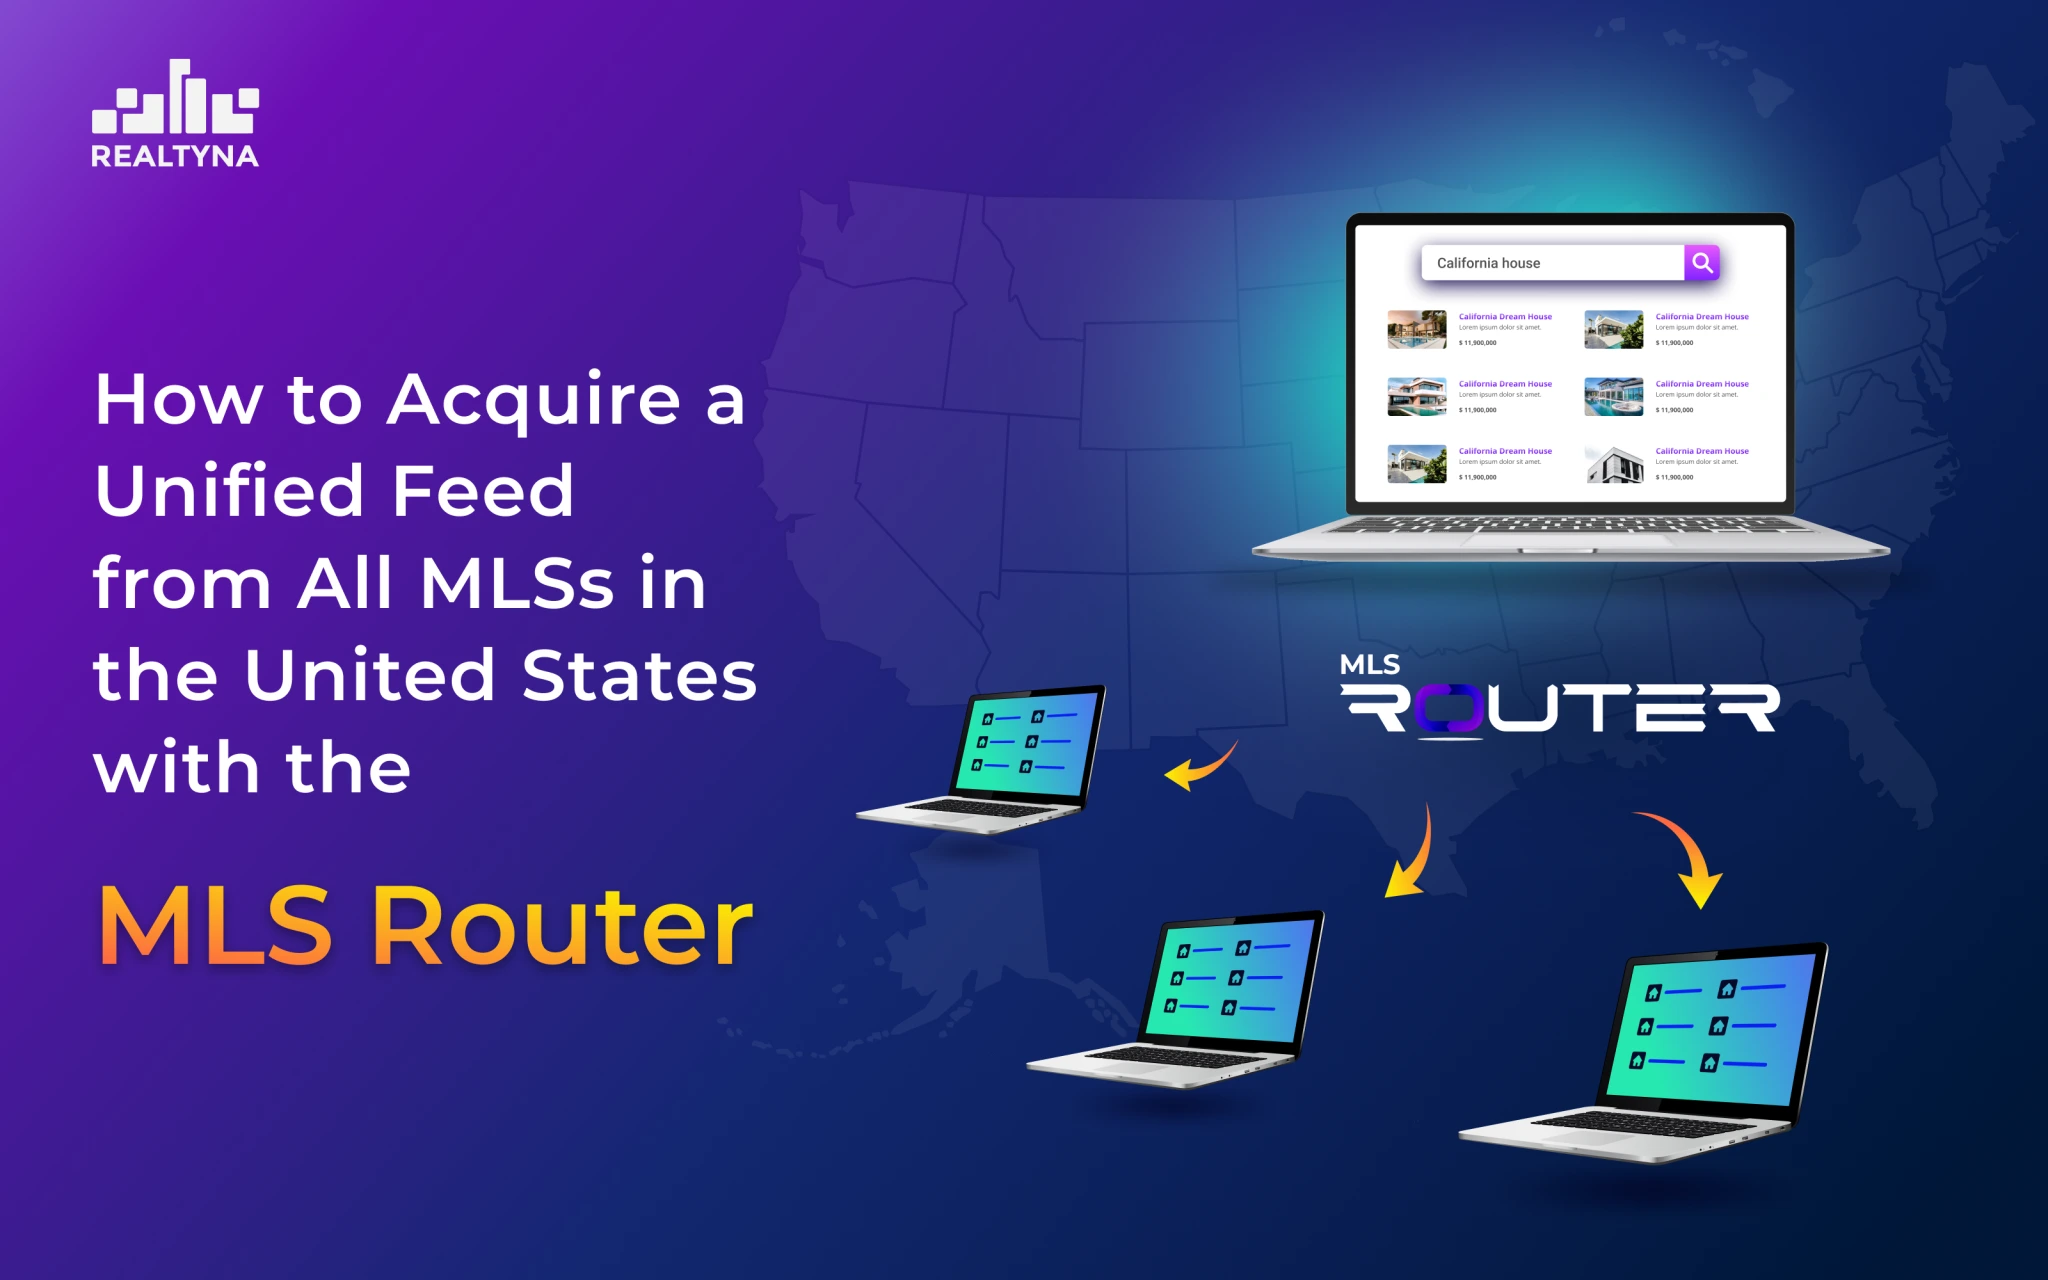 How to Acquire a Unified Feed from All MLSs in the United States with the MLS Router